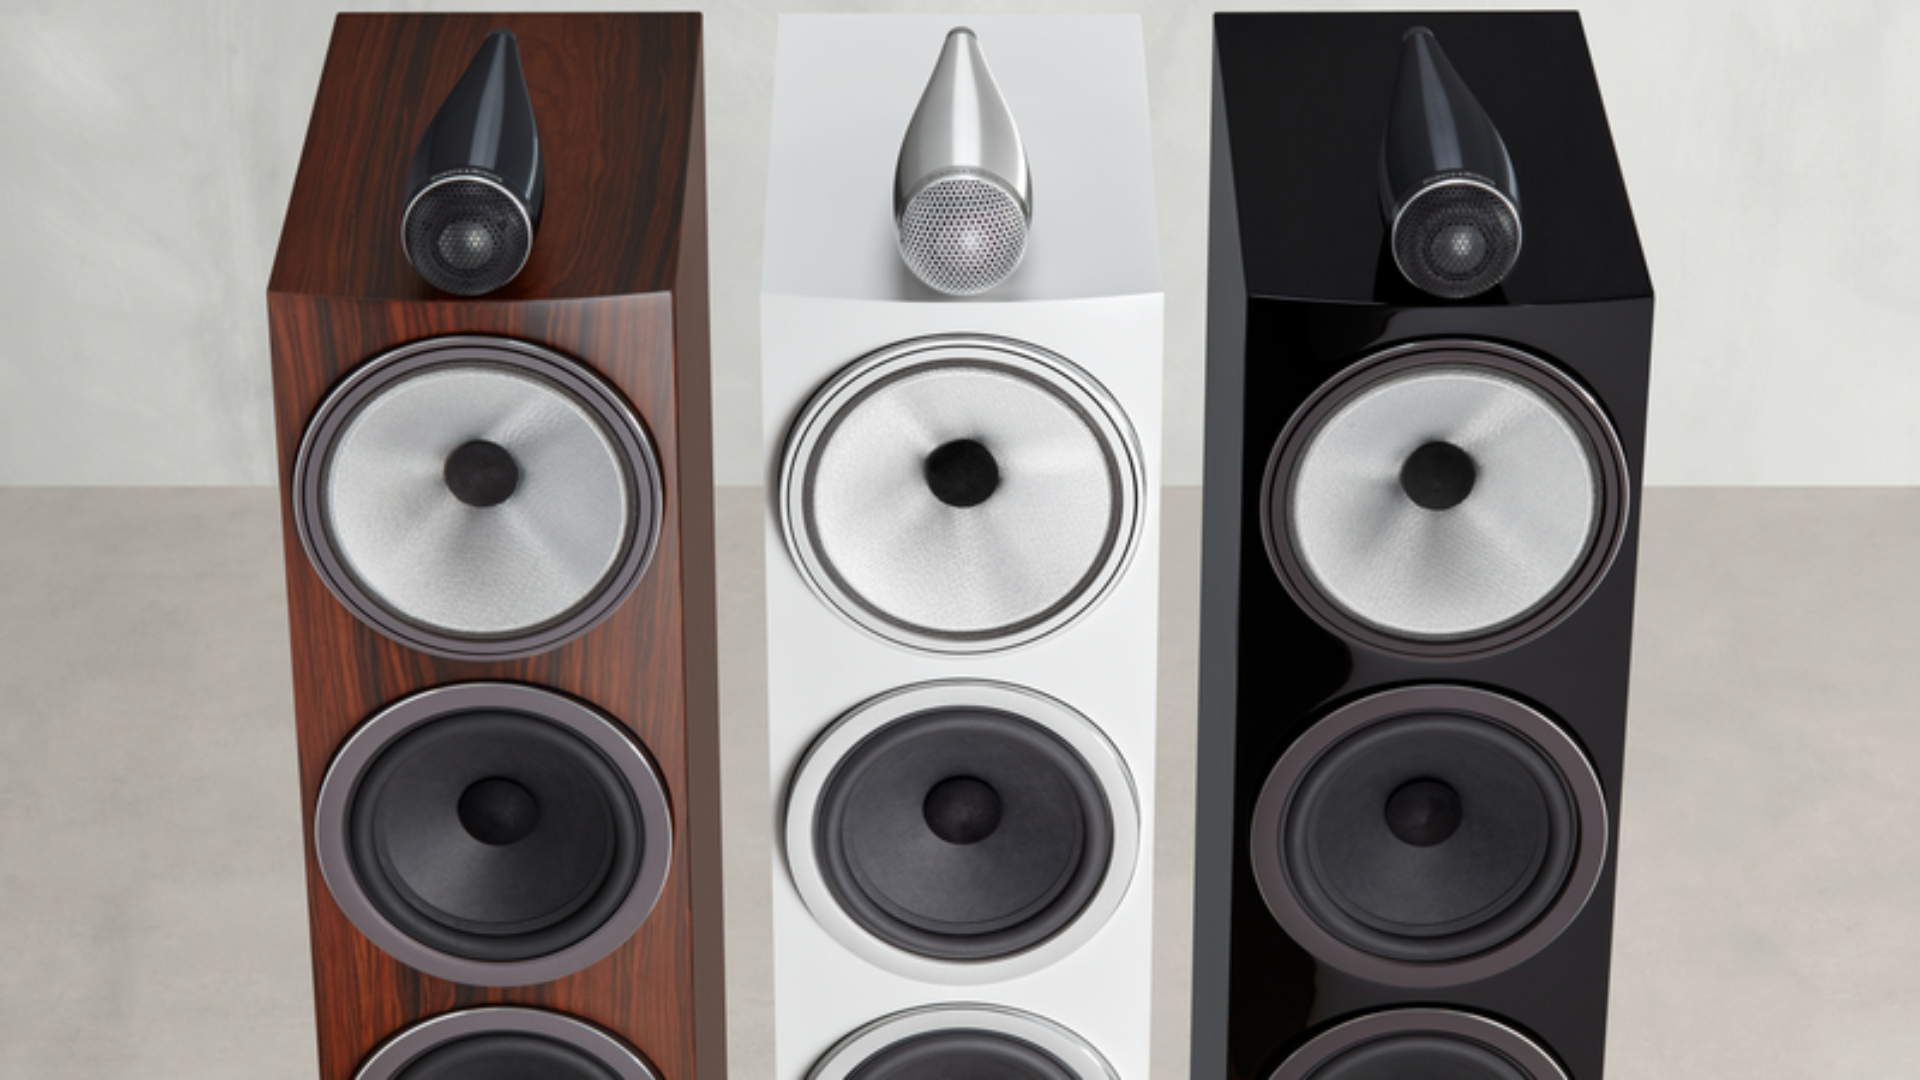 The new 700 Series by Bowers & Wilkins in various finishes (Image Credit: Bowers & Wilkins)